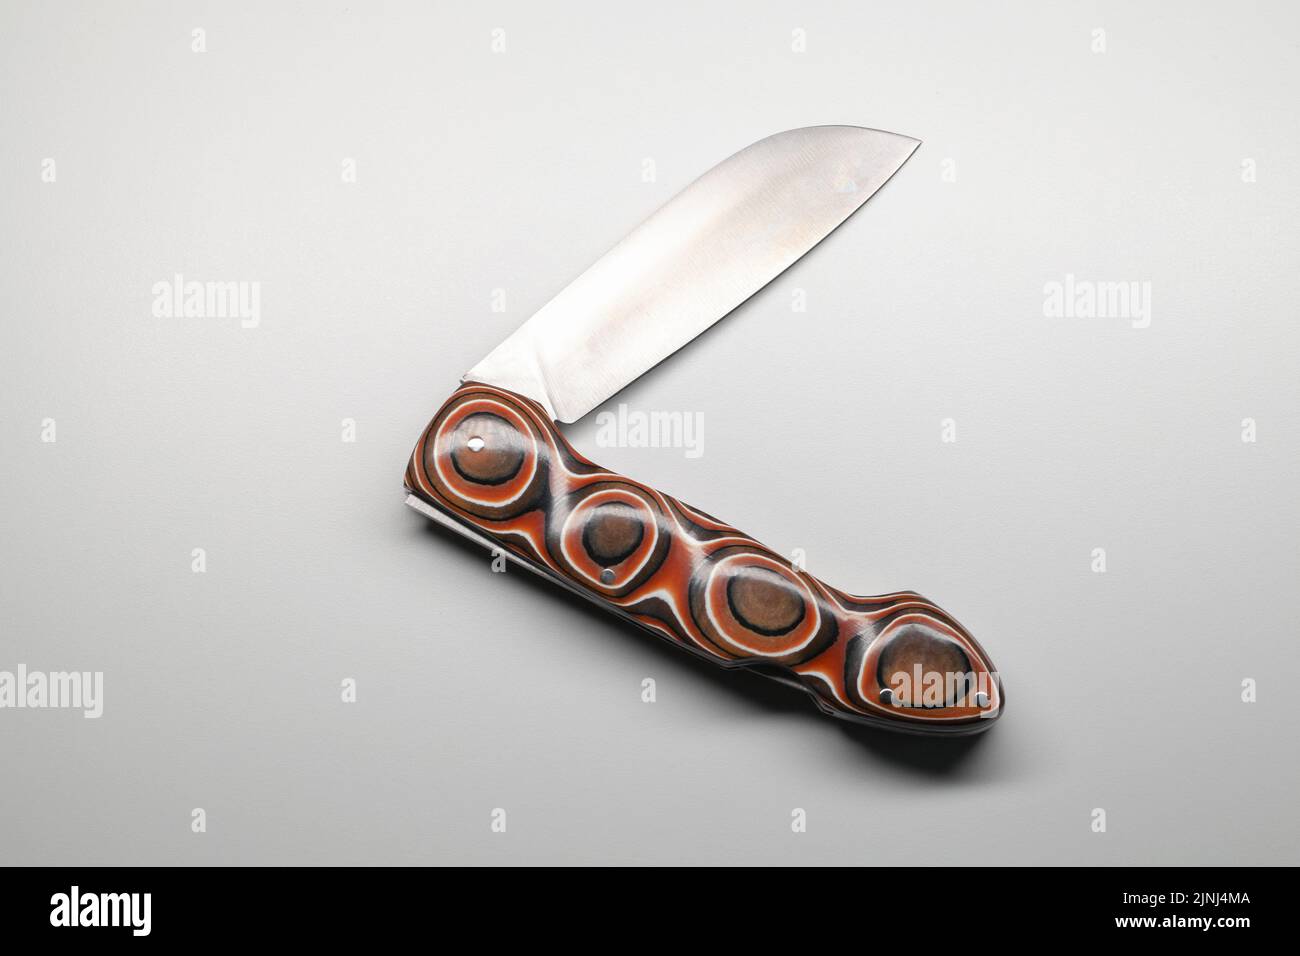 Half folded Jackknife with sharp steel blade and polymer handle with soft geometric pattern Stock Photo